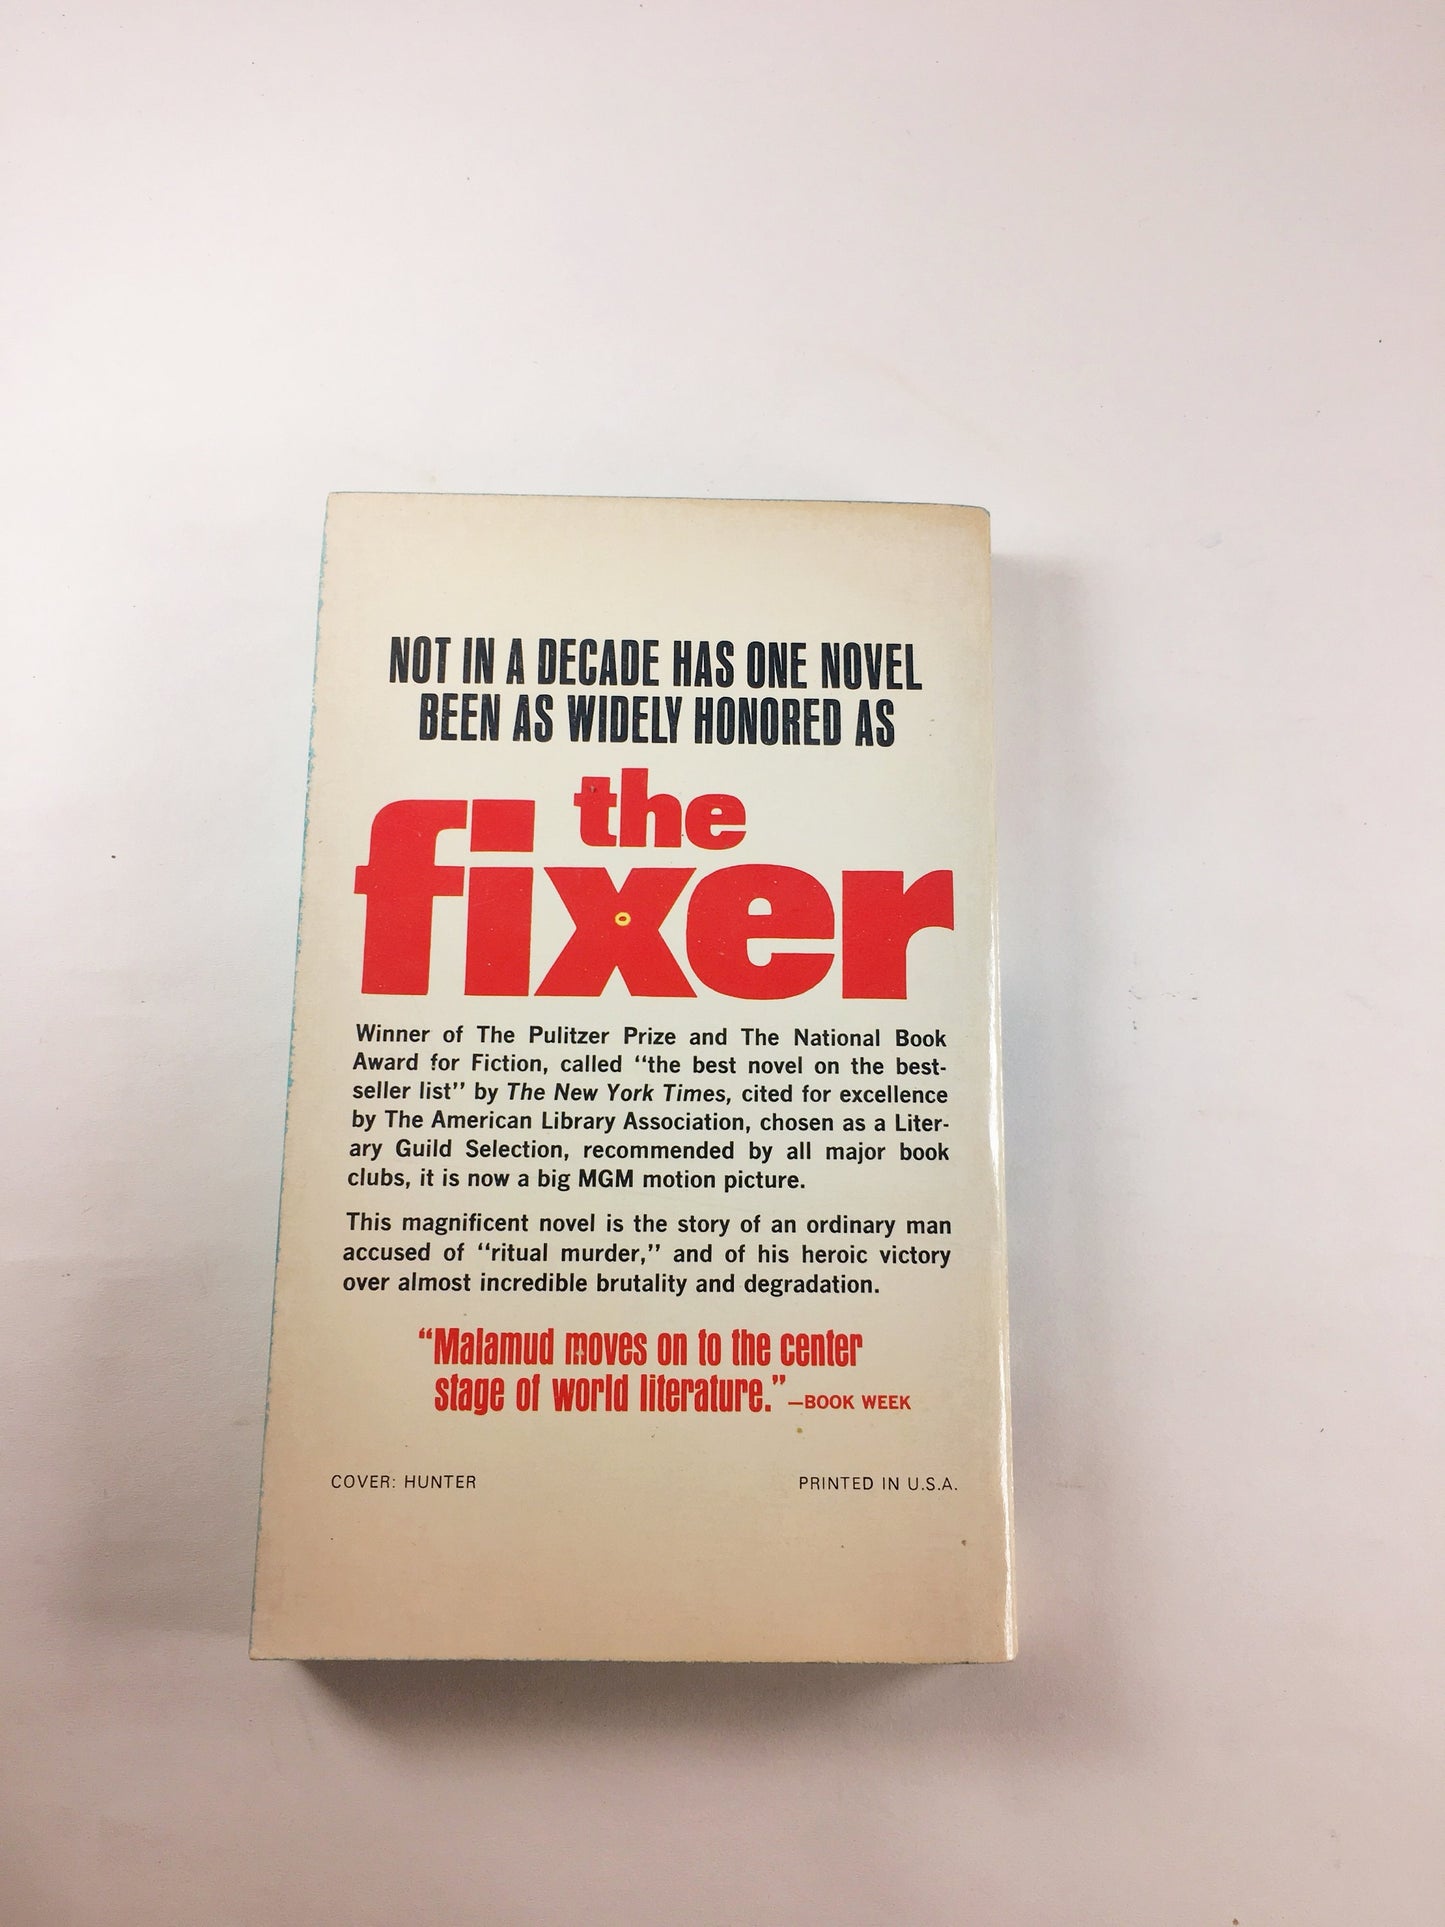 The Fixer by Malamud. EARLY PRINTING Vintage paperback book circa 1969. National Book Award and the Pulitzer Prize. Great Jewish novel